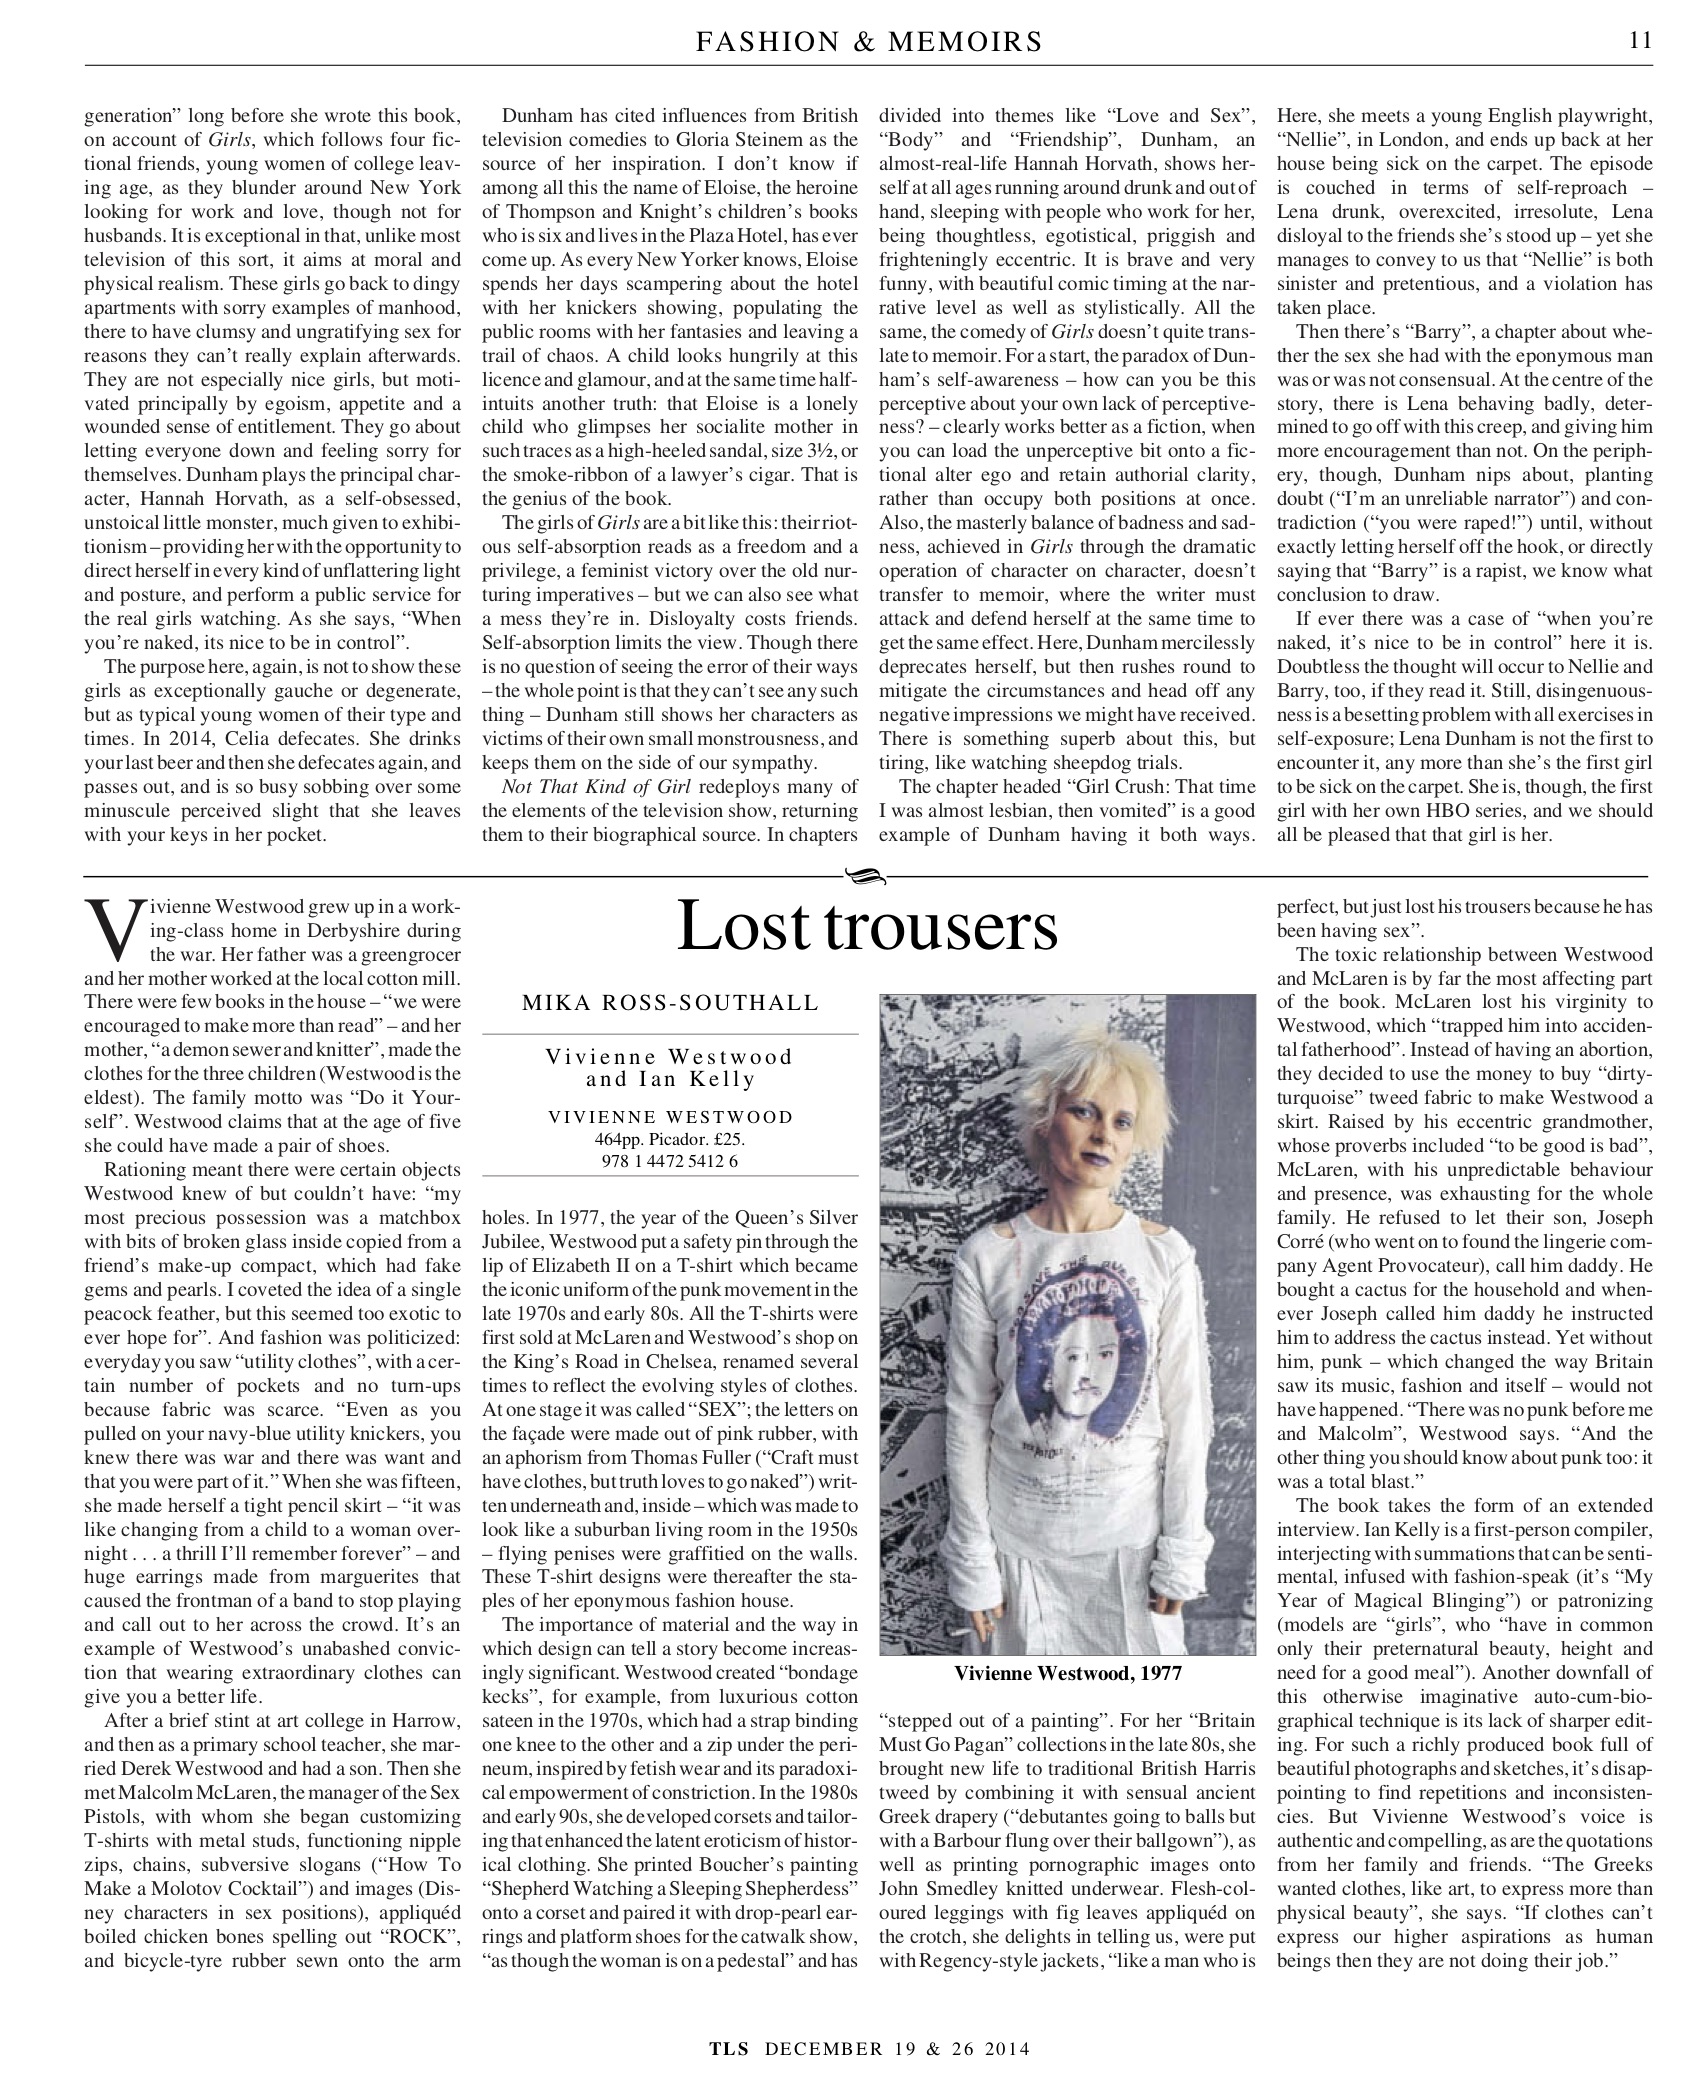 The Times Literary Supplement, 19 &amp; 26 December 2014. "Lost trousers, Vivienne Westwood"